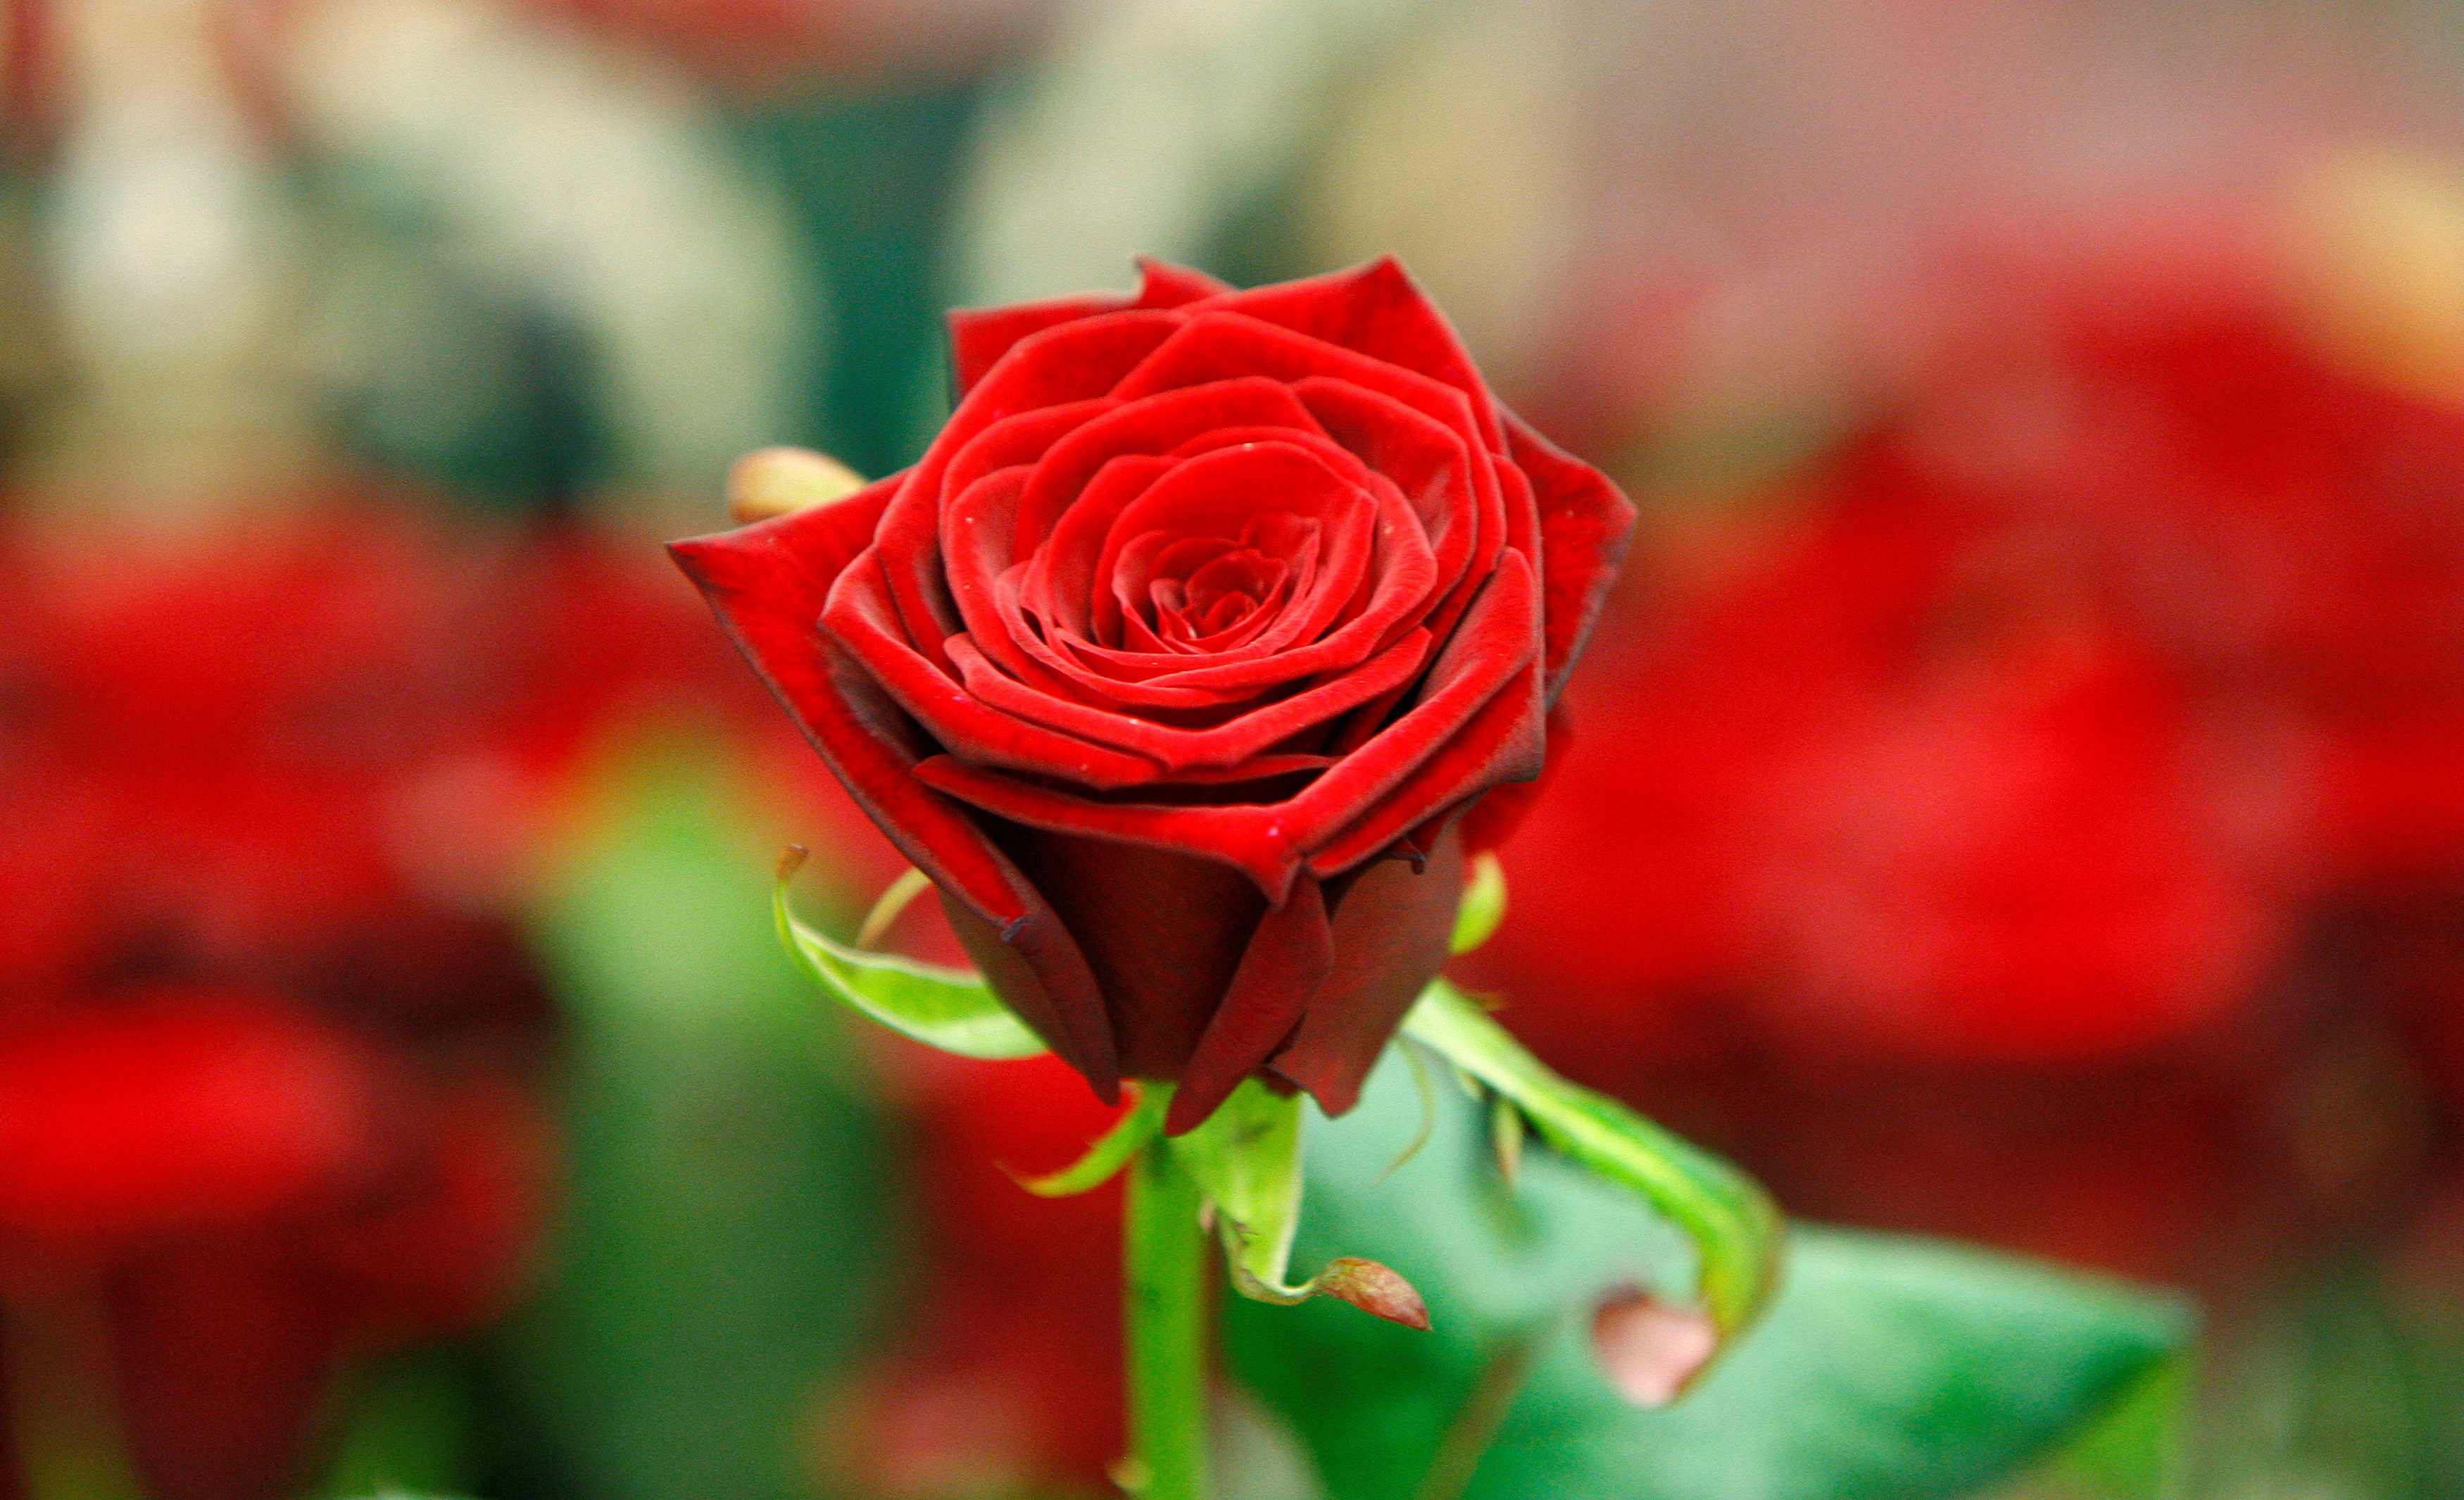 A red rose is displayed on a stall at New Covent Garden Market a day before Valentine's Day, London